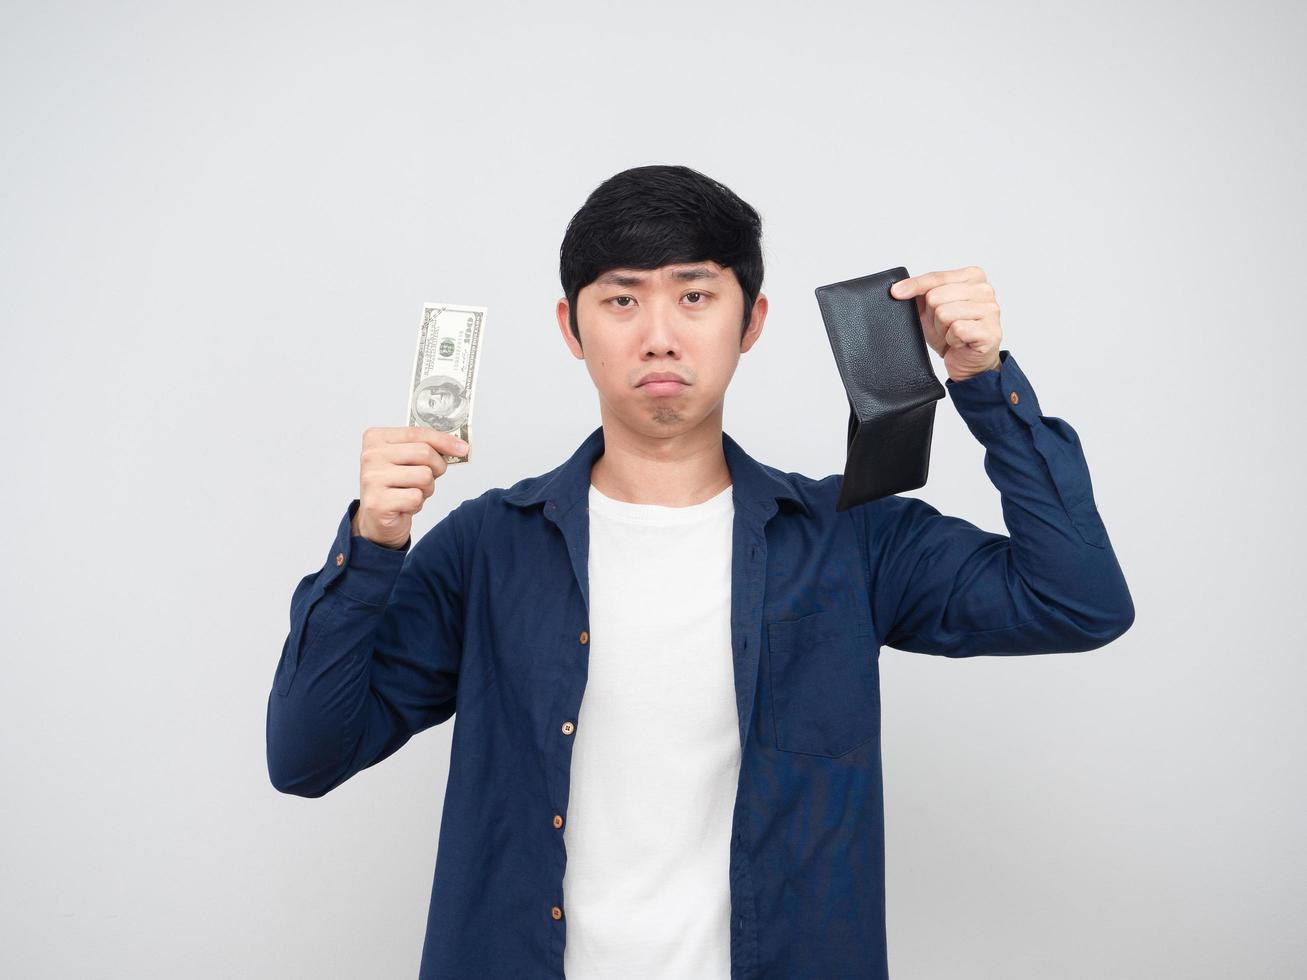 Asian man holding money dollar and wallet sad face white background poor man concept photo